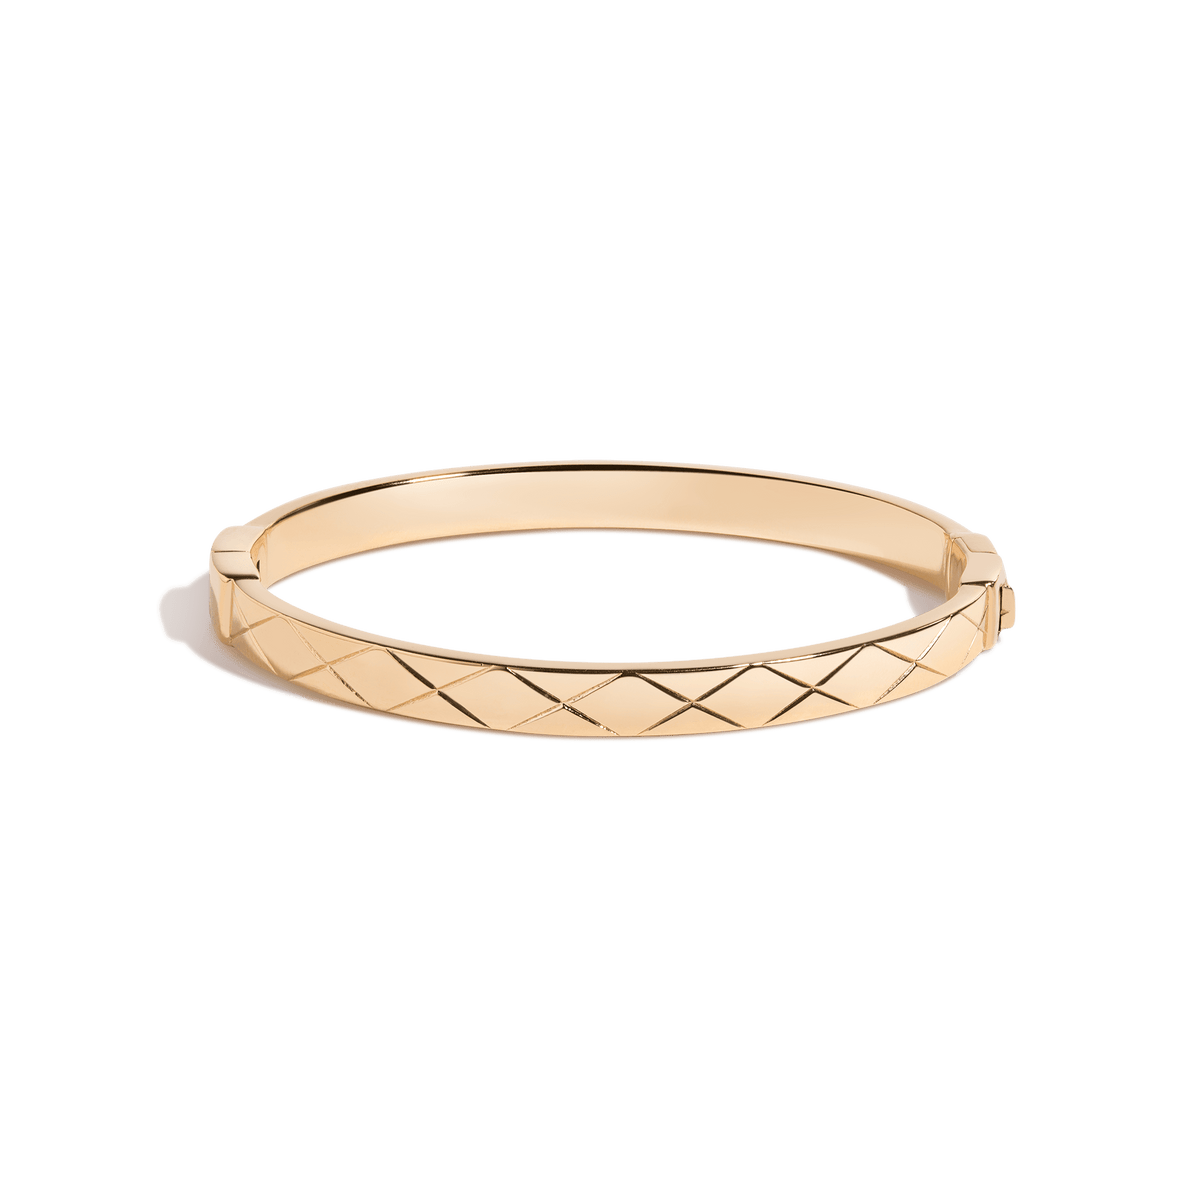 Aurate New York Quilted Gold Hinged Bracelet, 18K Yellow Gold, Size Small/Medium